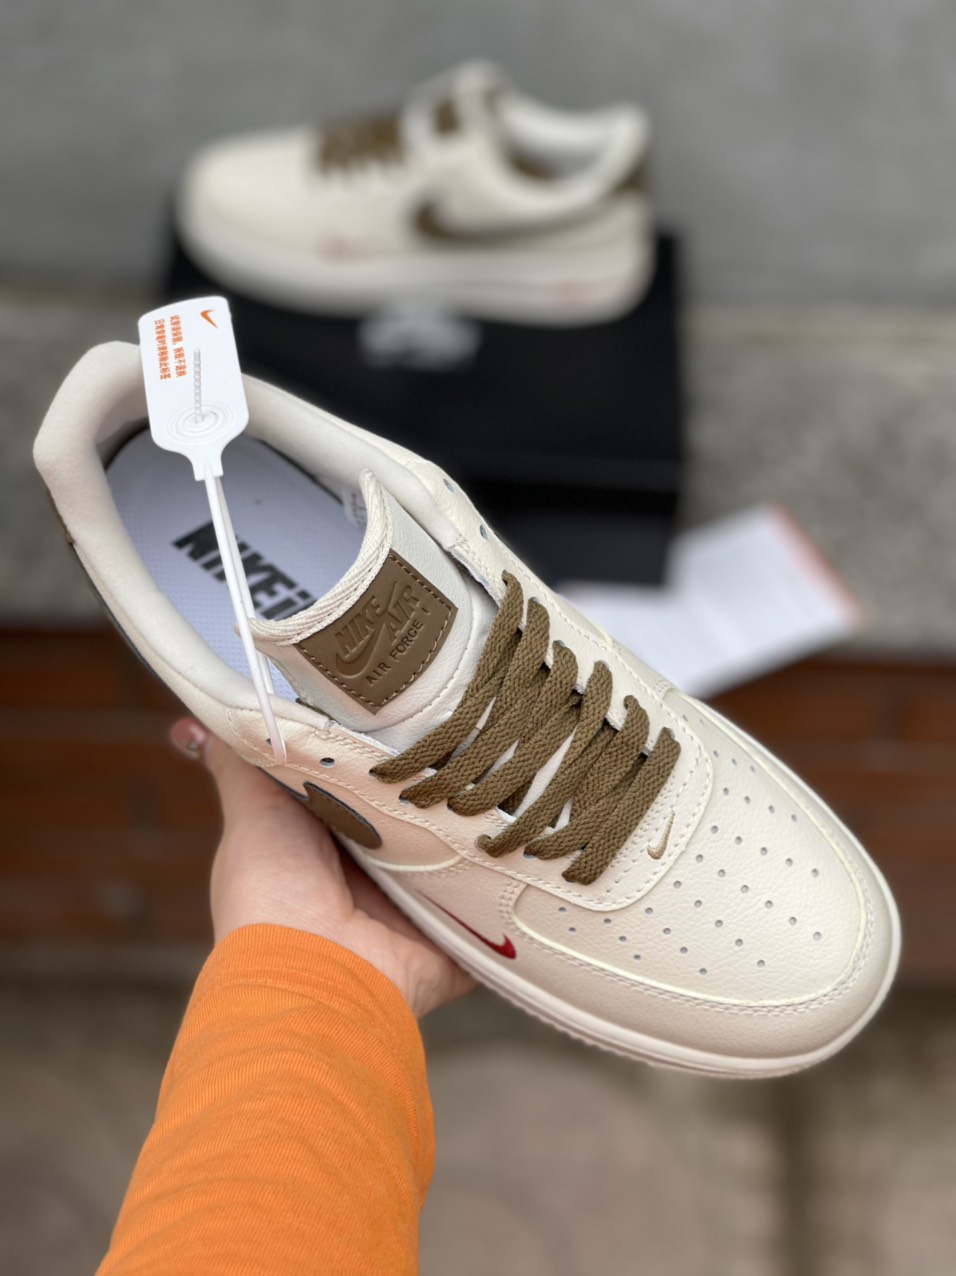 Giày Nike Air Force 1 Low Premium White Brown Best Quality